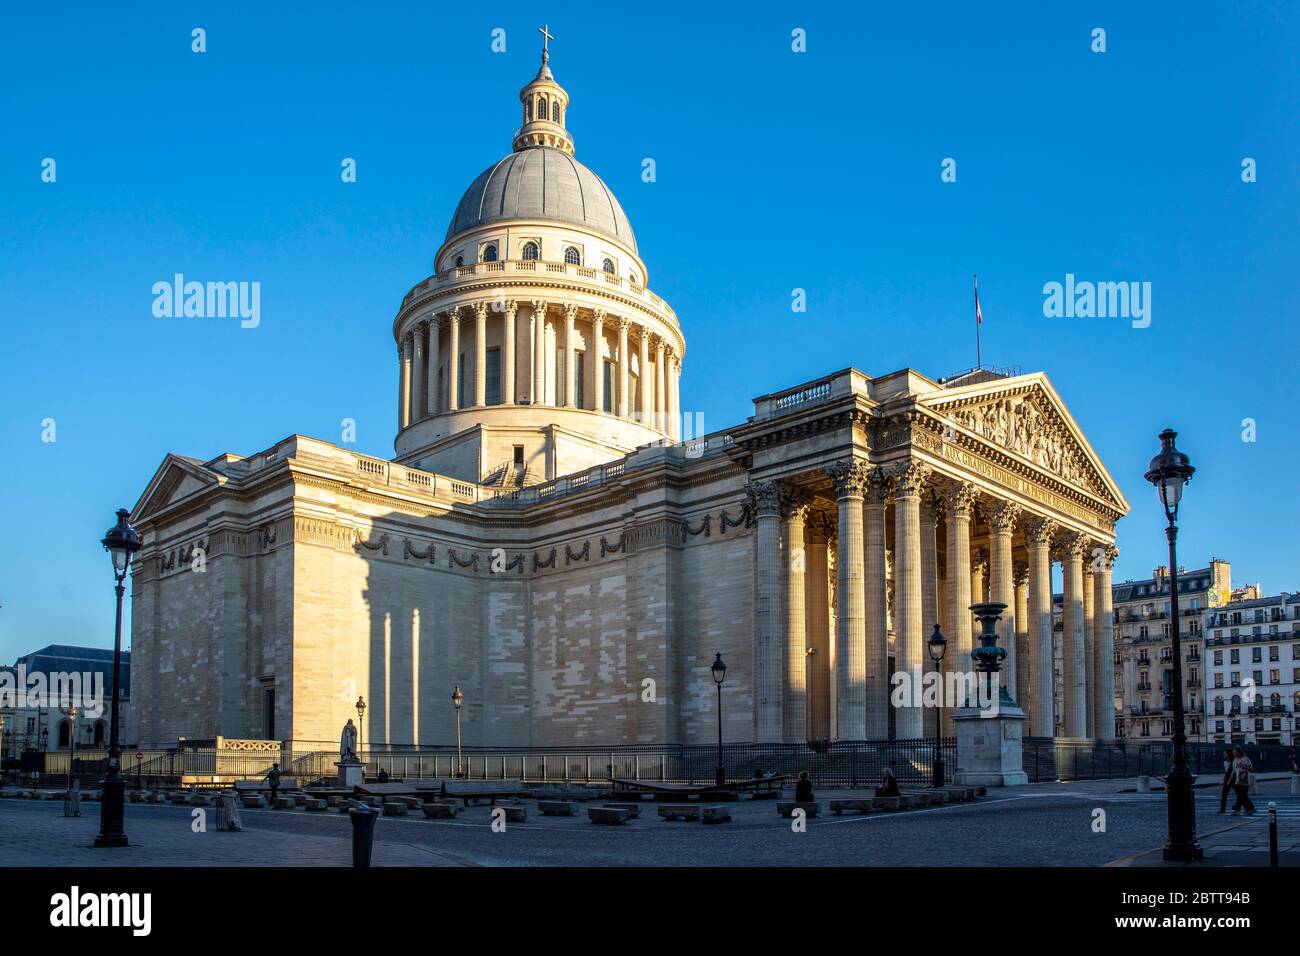 Paris, France - April 5, 2020: 20th day of containment because of Covid-19 in front of Pantheon in Paris Stock Photo